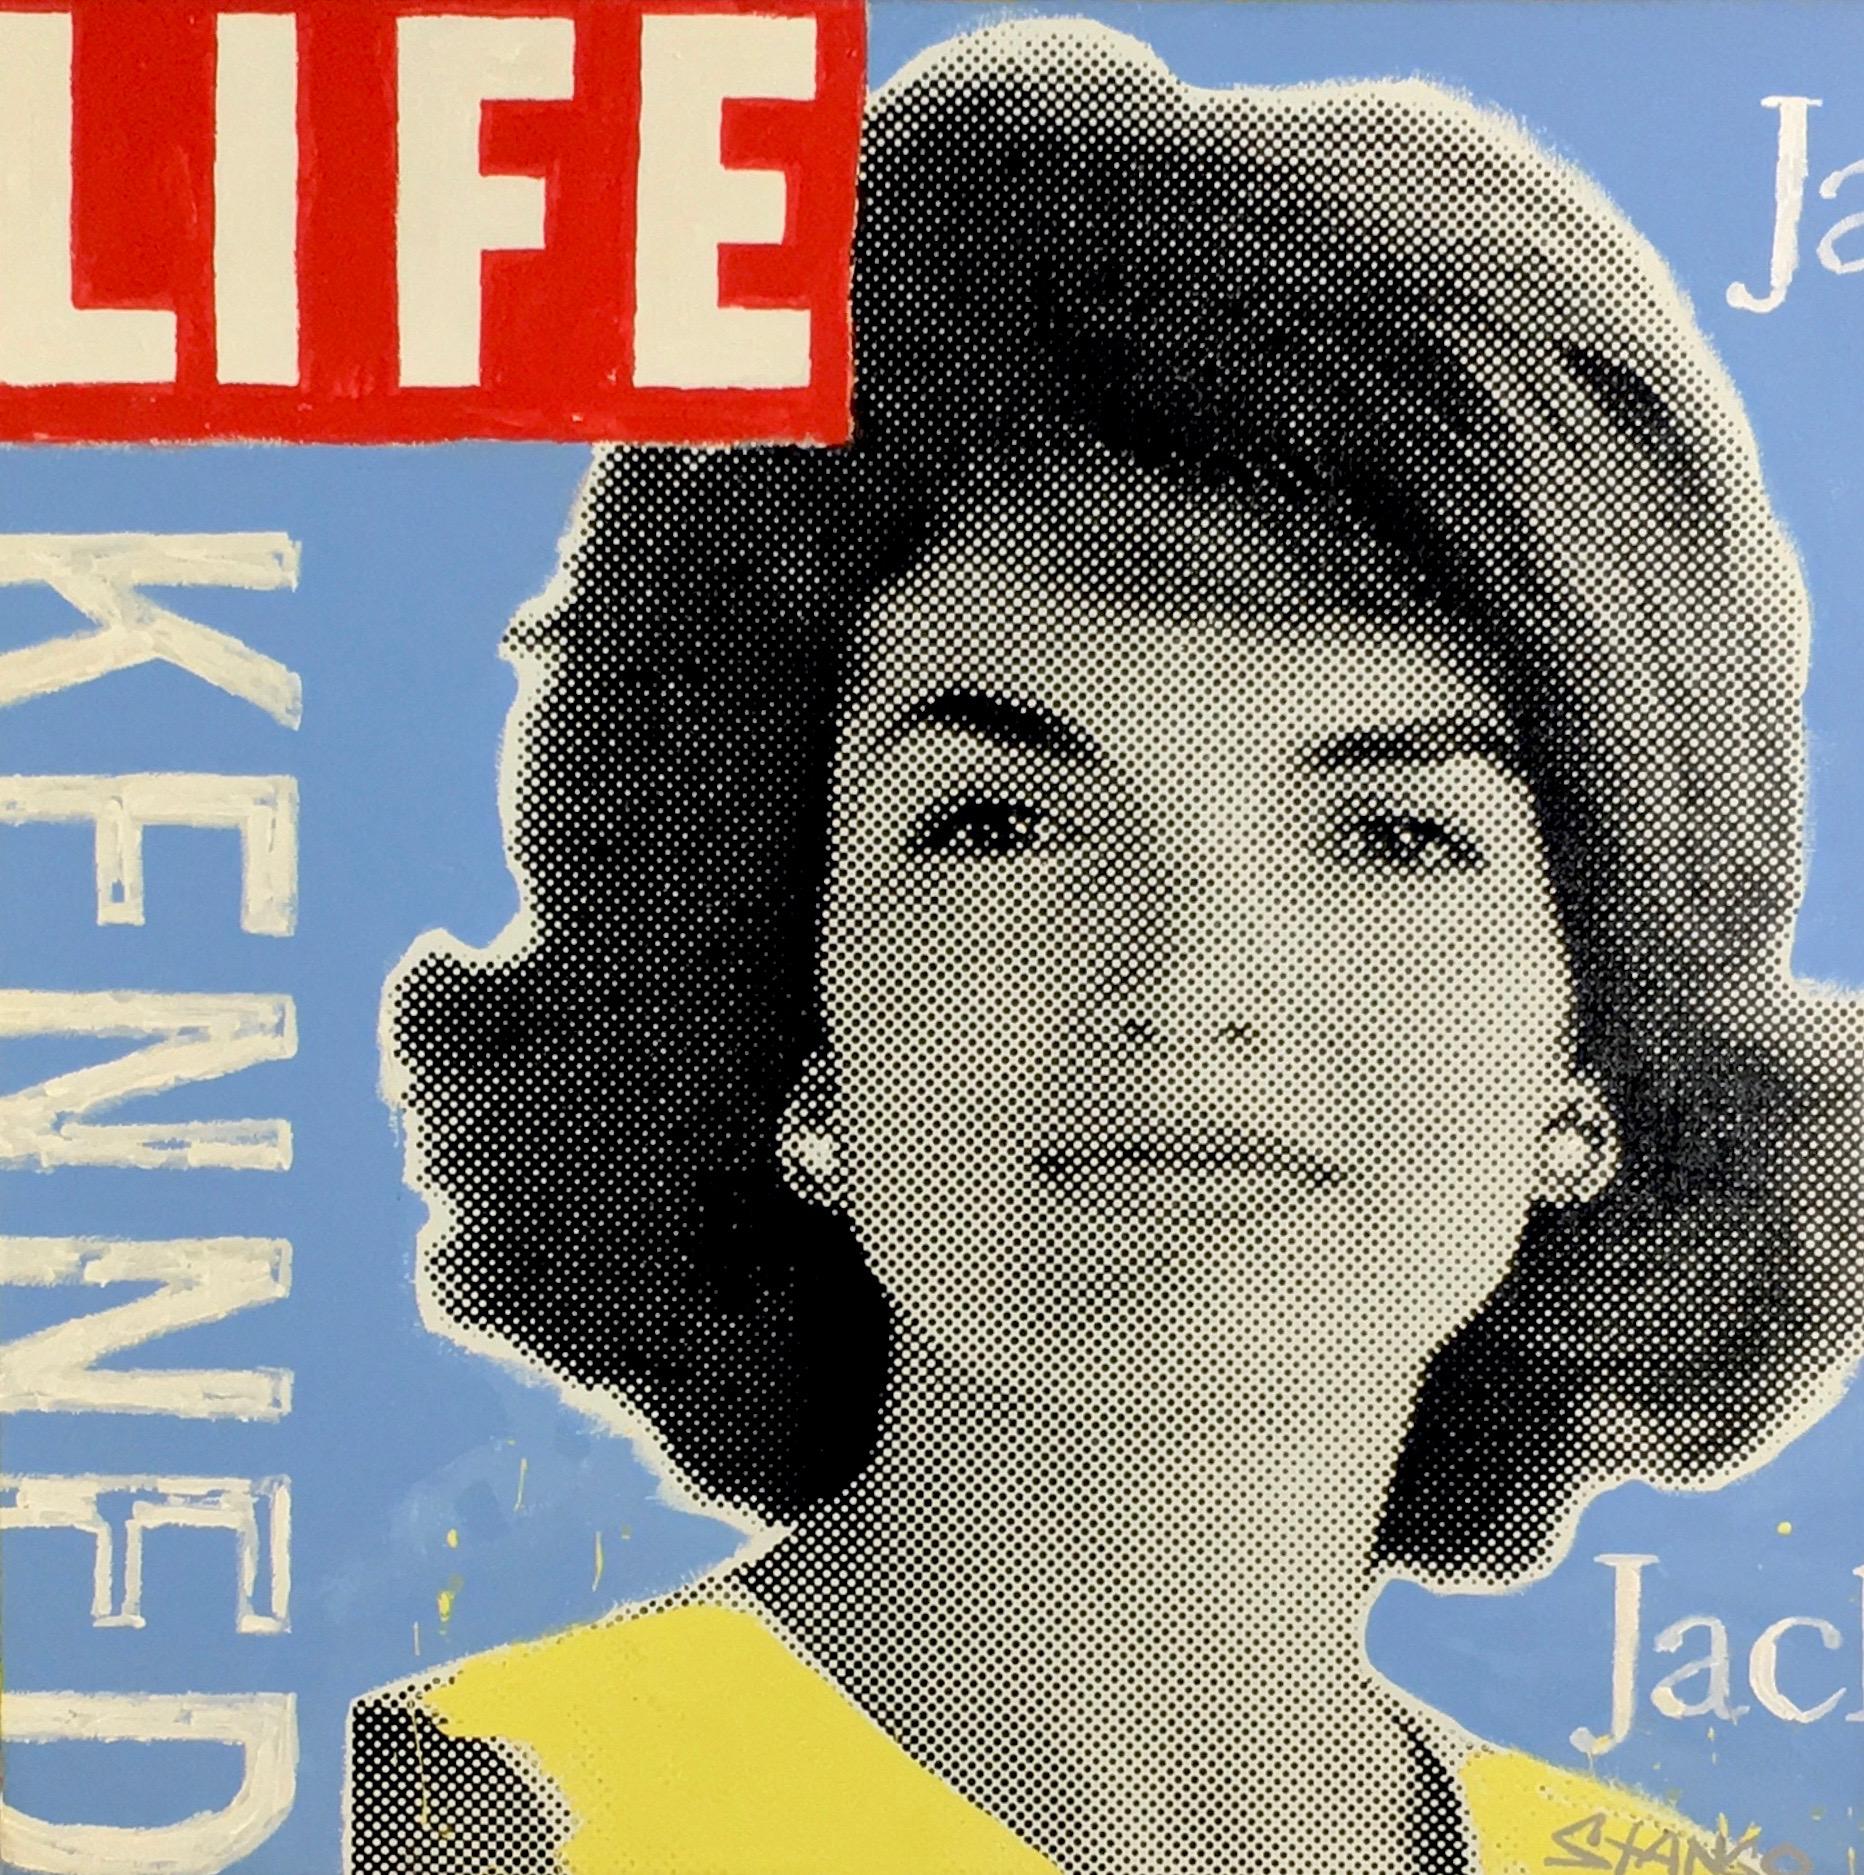 Jackie Comes to Life  - Painting by John Stango